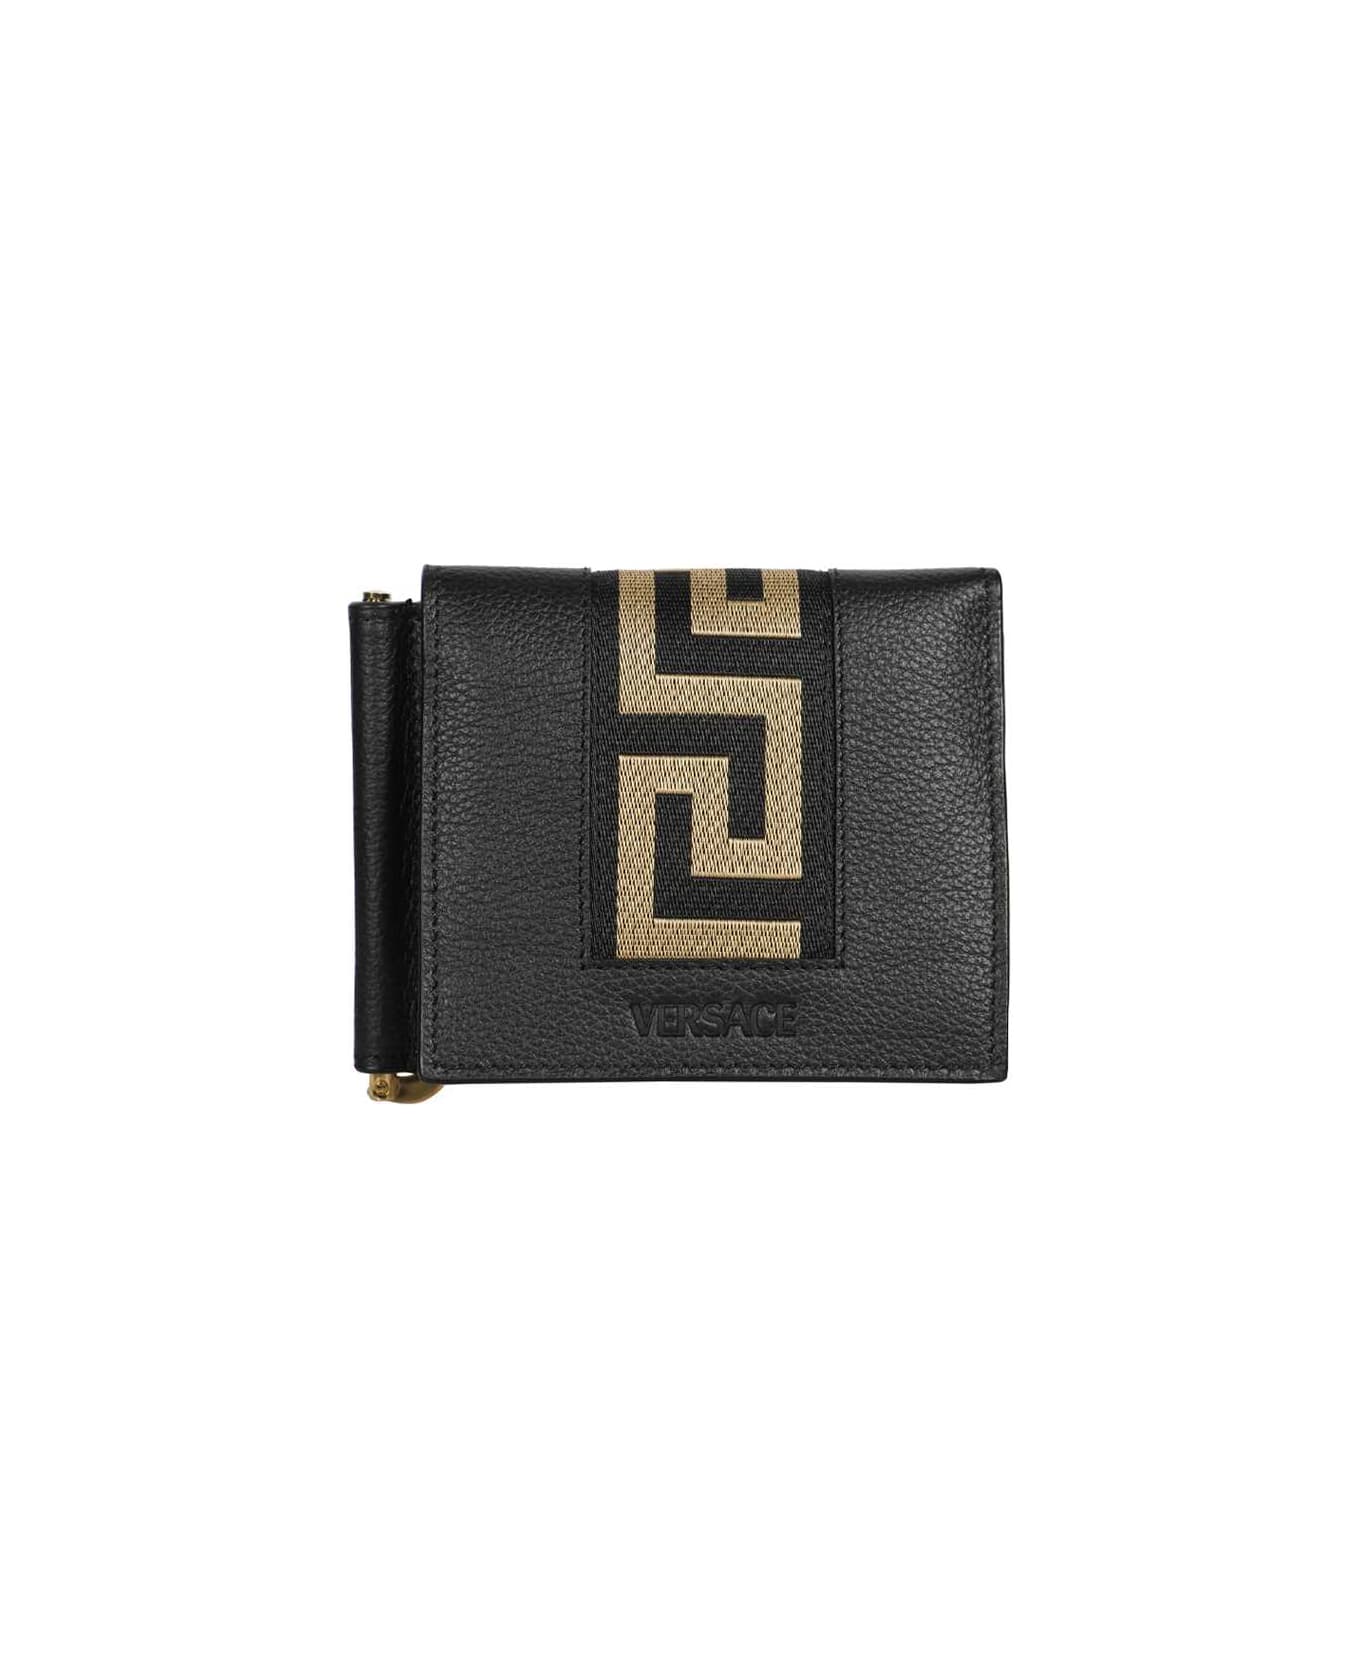 Versace Leather Flap-over Wallet - black